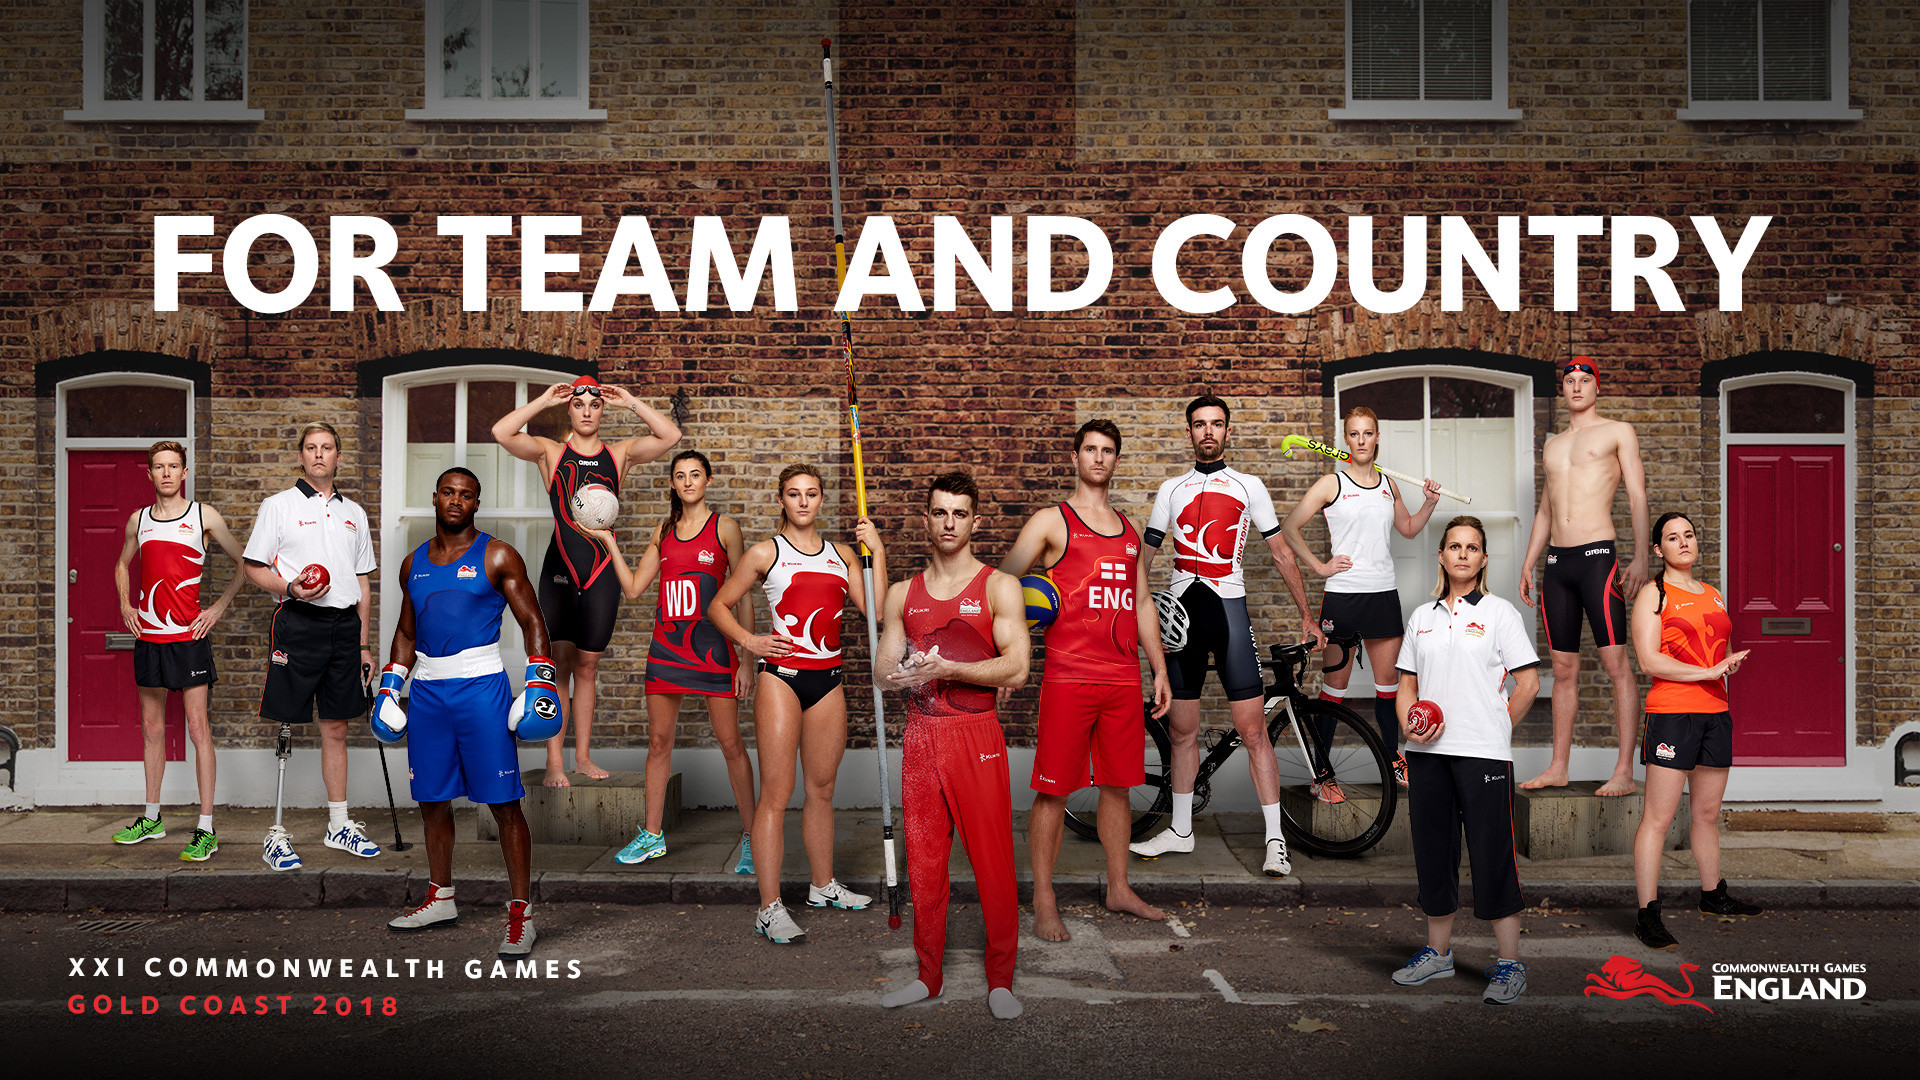 Commonwealth Games England have unveiled their team kit for Gold Coast 2018 ©CGE